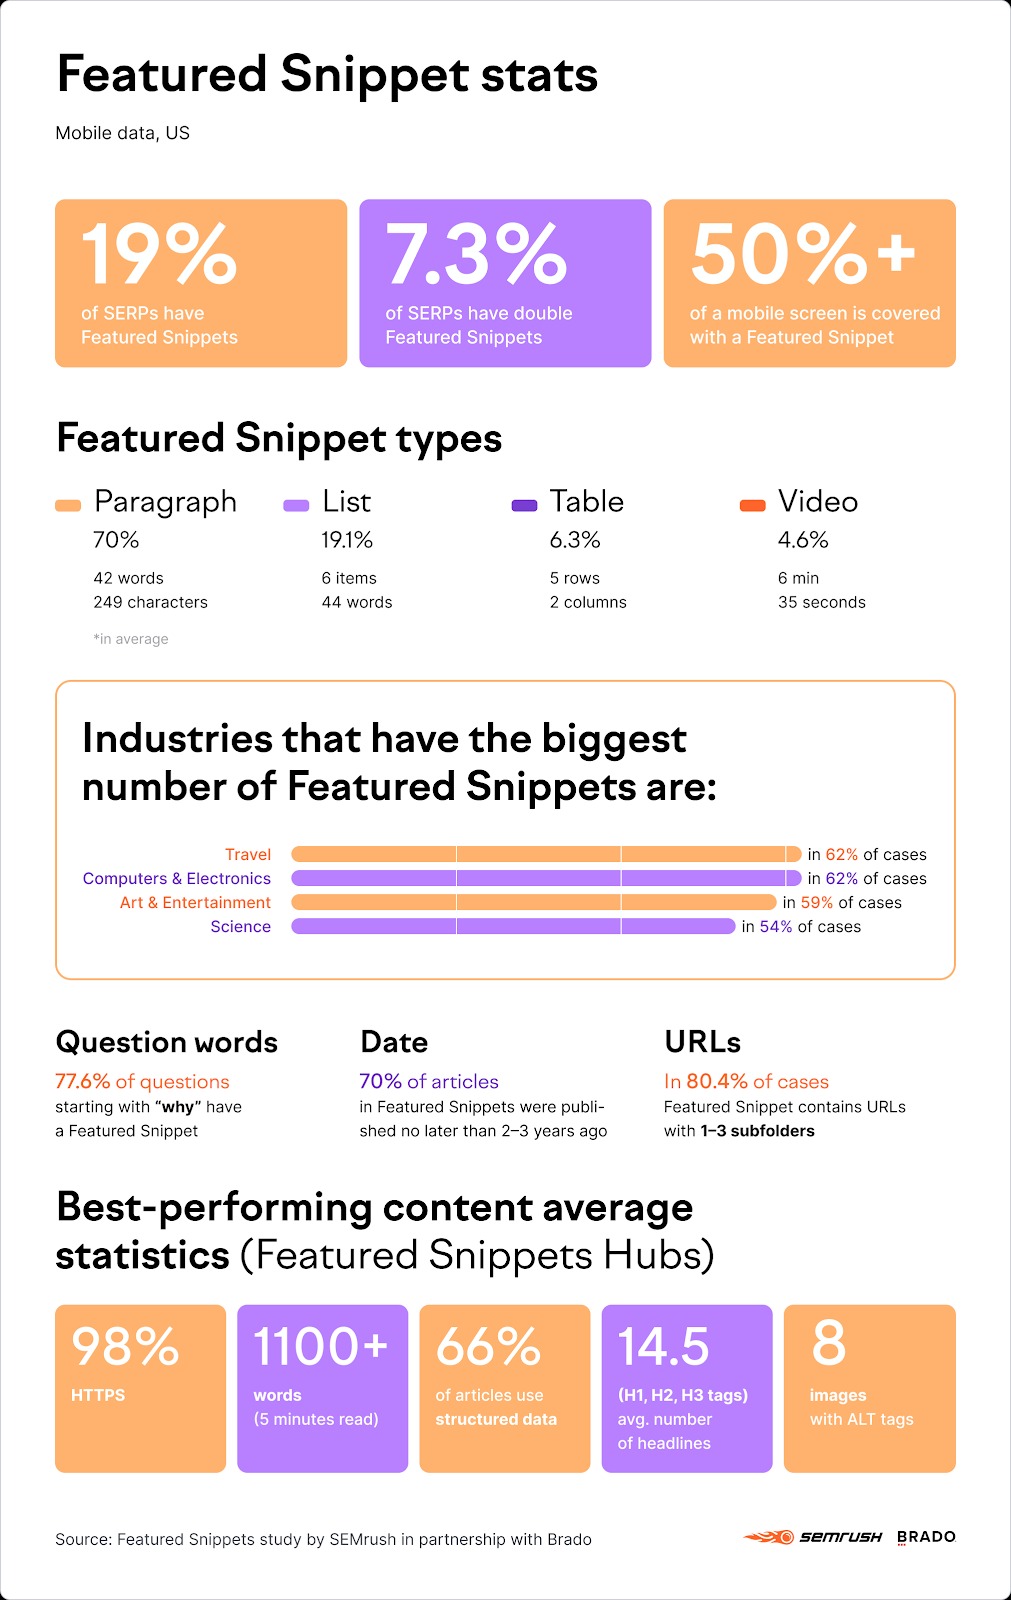 Infographic about Featured Snippet stats